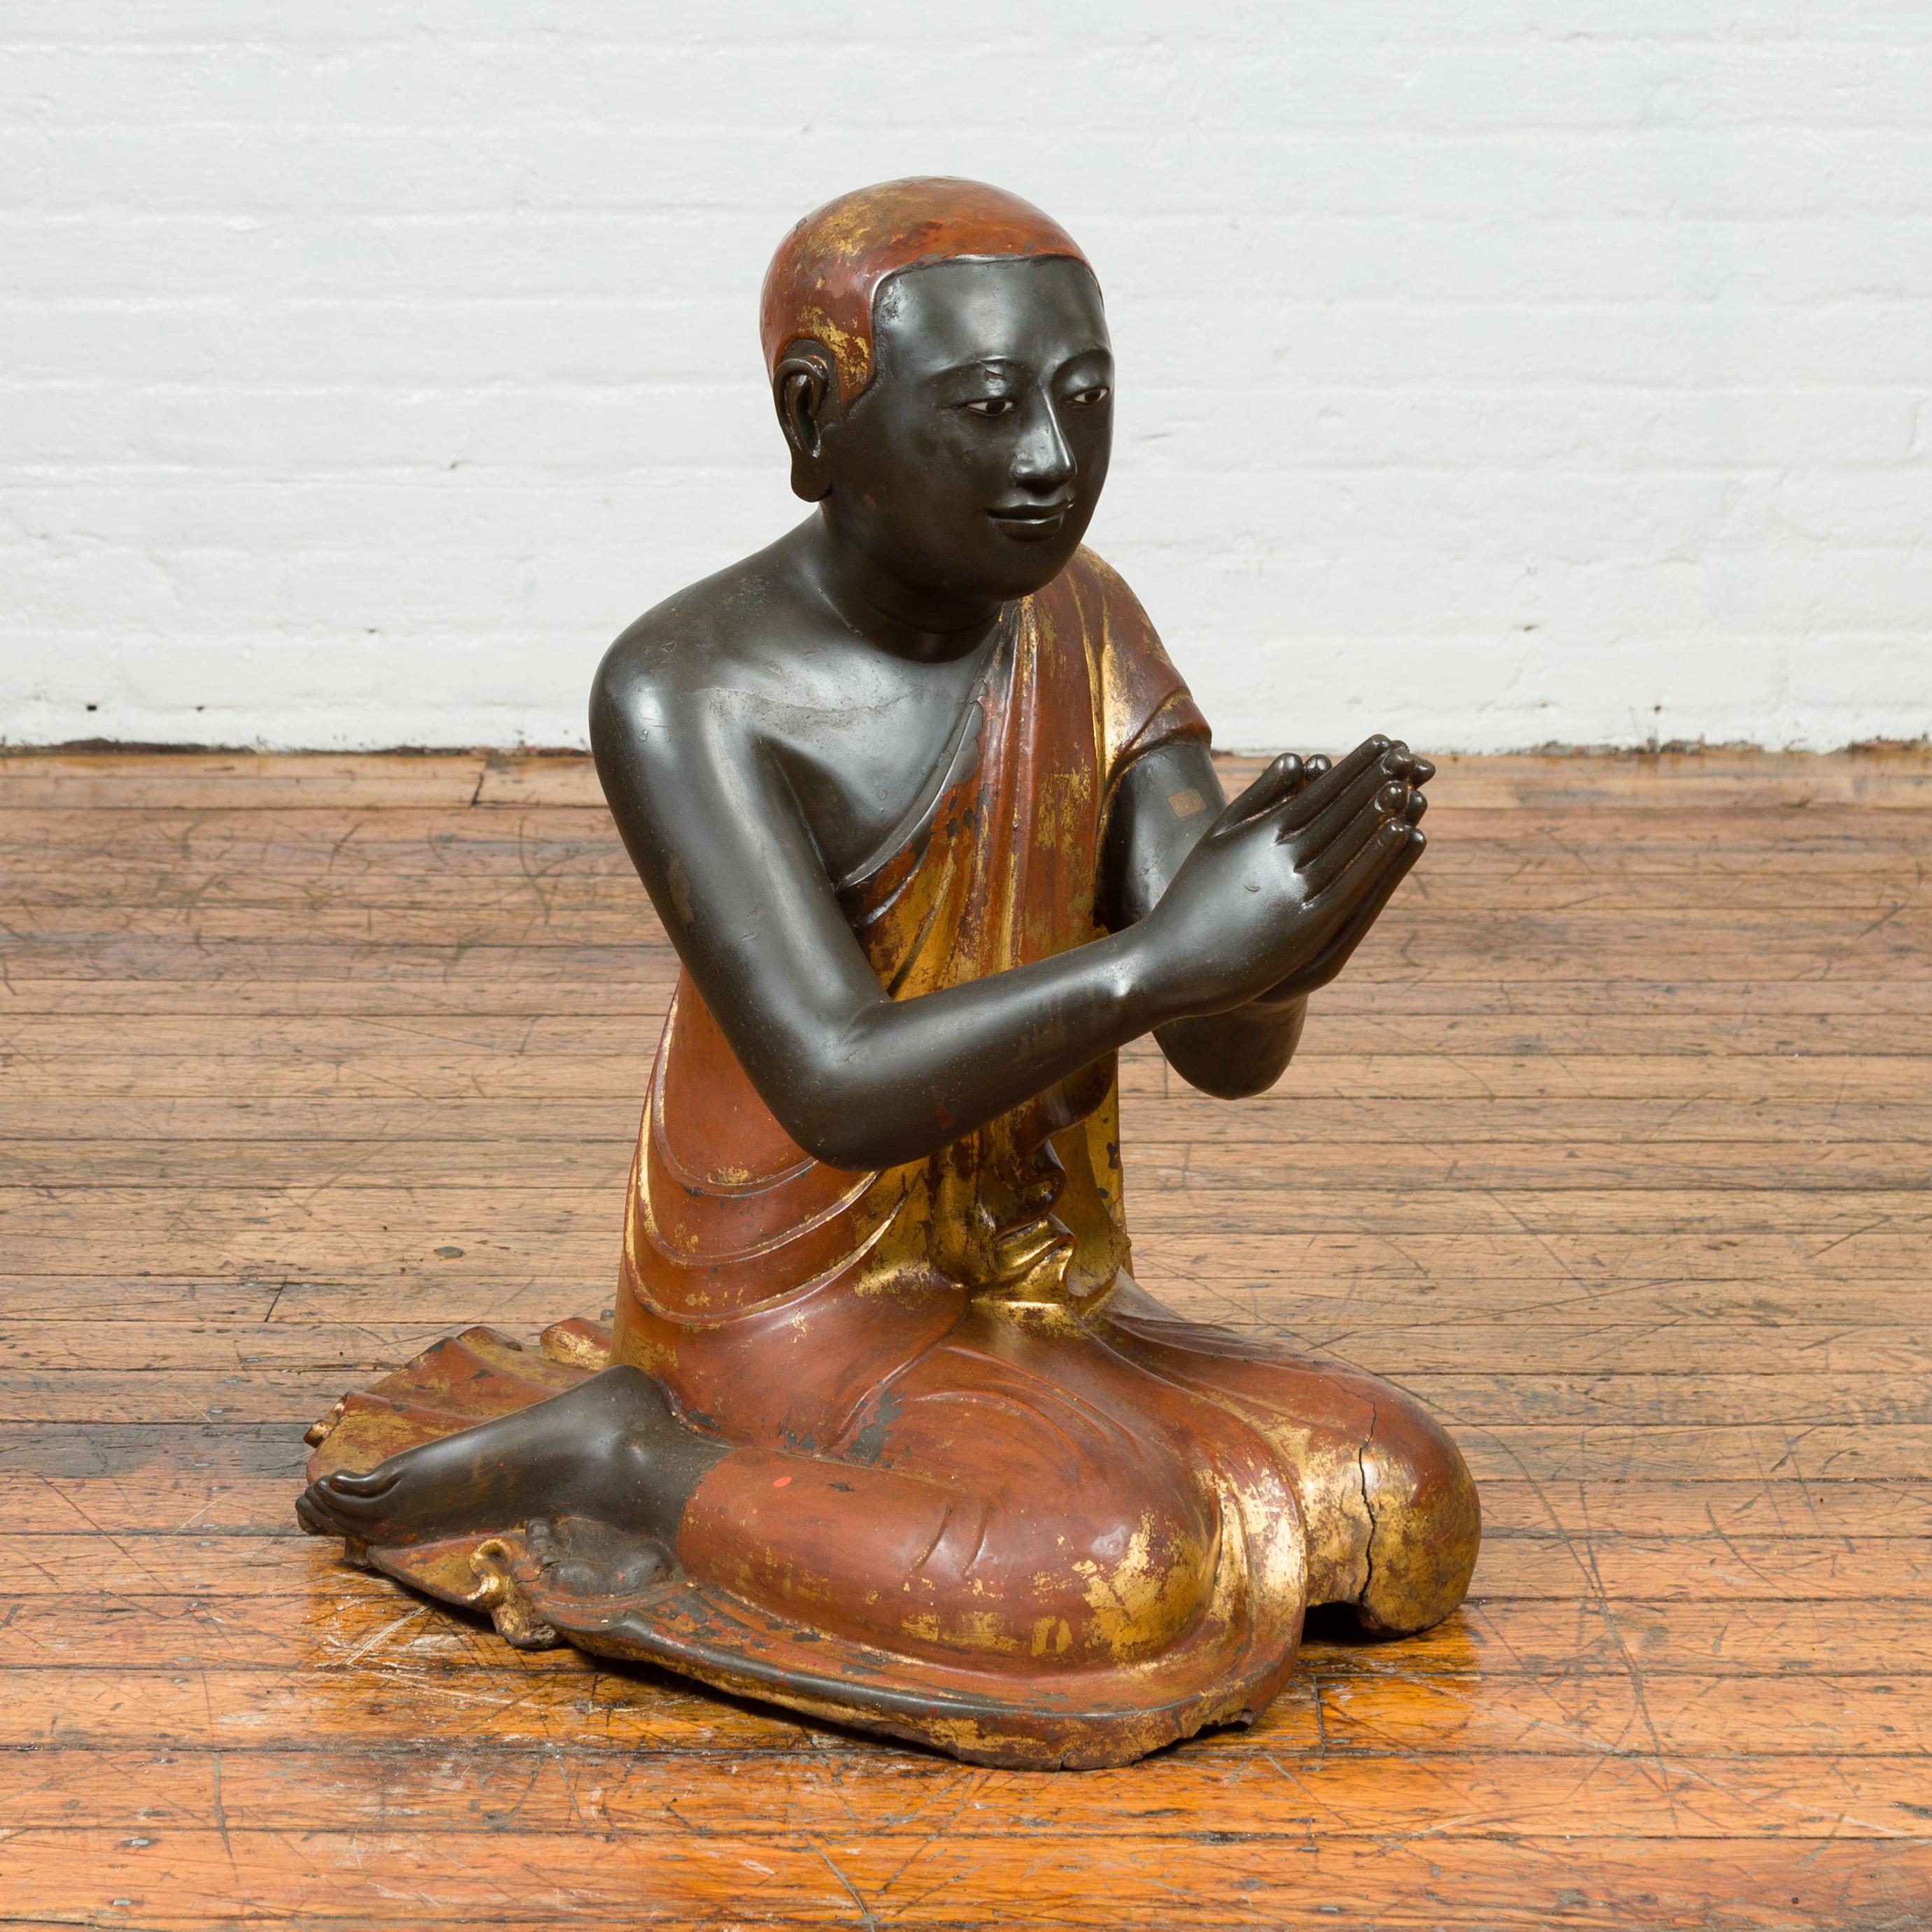 A Thai kneeling ceremonial monk sculpture from circa 1920 with hand painted gilt and lacquer over stone. This remarkable Thai ceremonial kneeling monk sculpture, discovered within a temple, is an extraordinary artifact of spiritual significance.